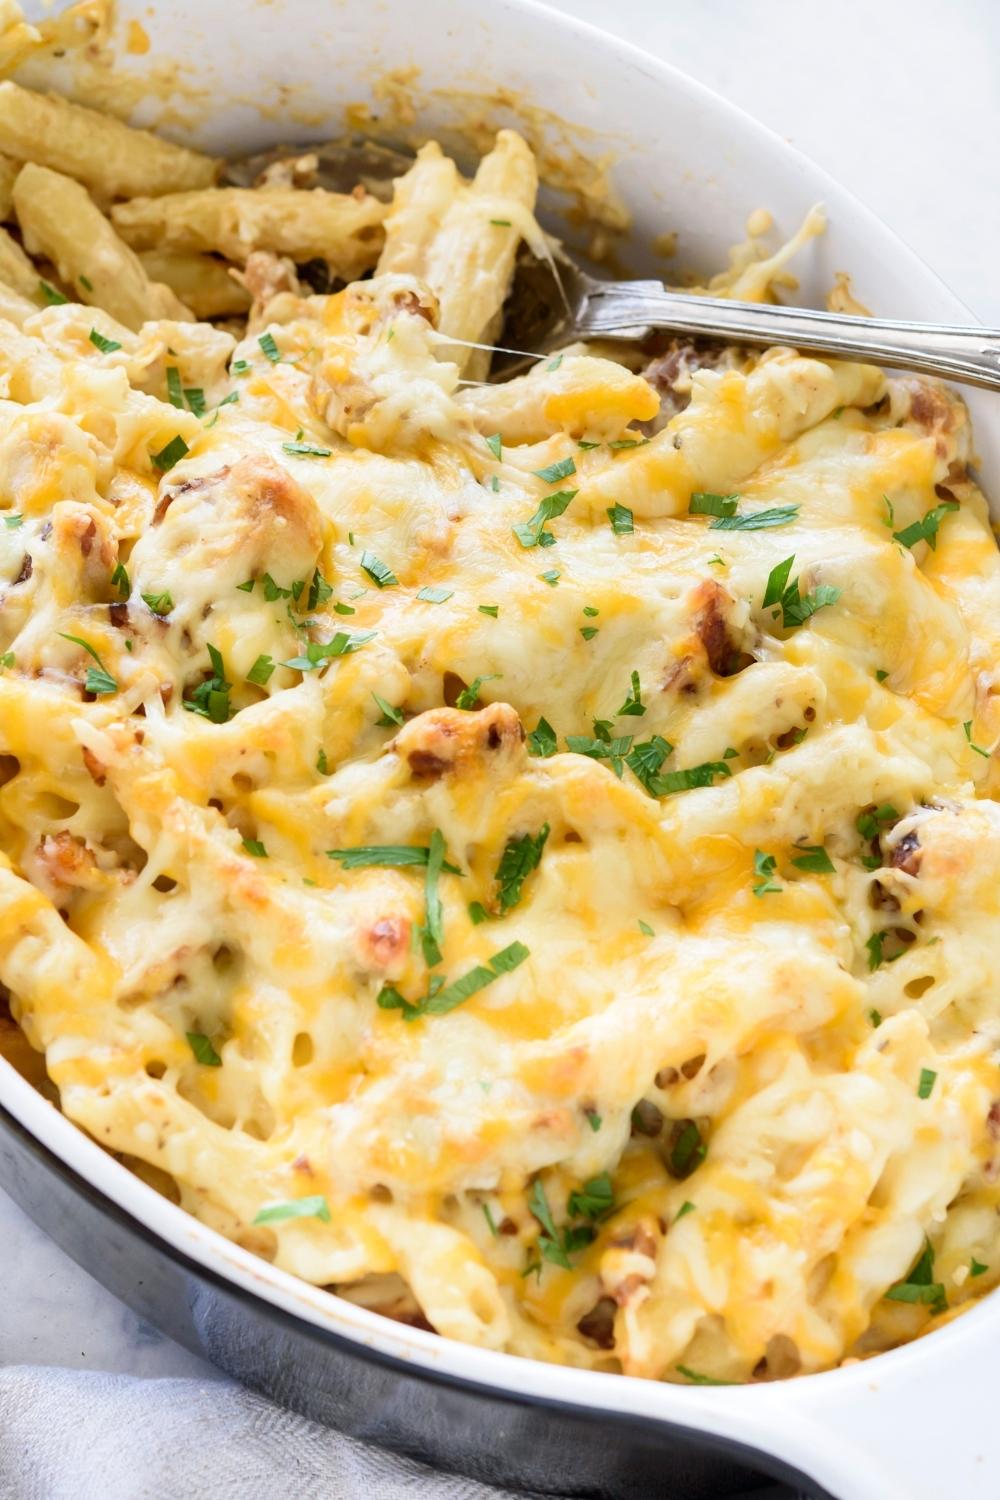 A casserole dish with chicken alfredo bake garnished with parsley.